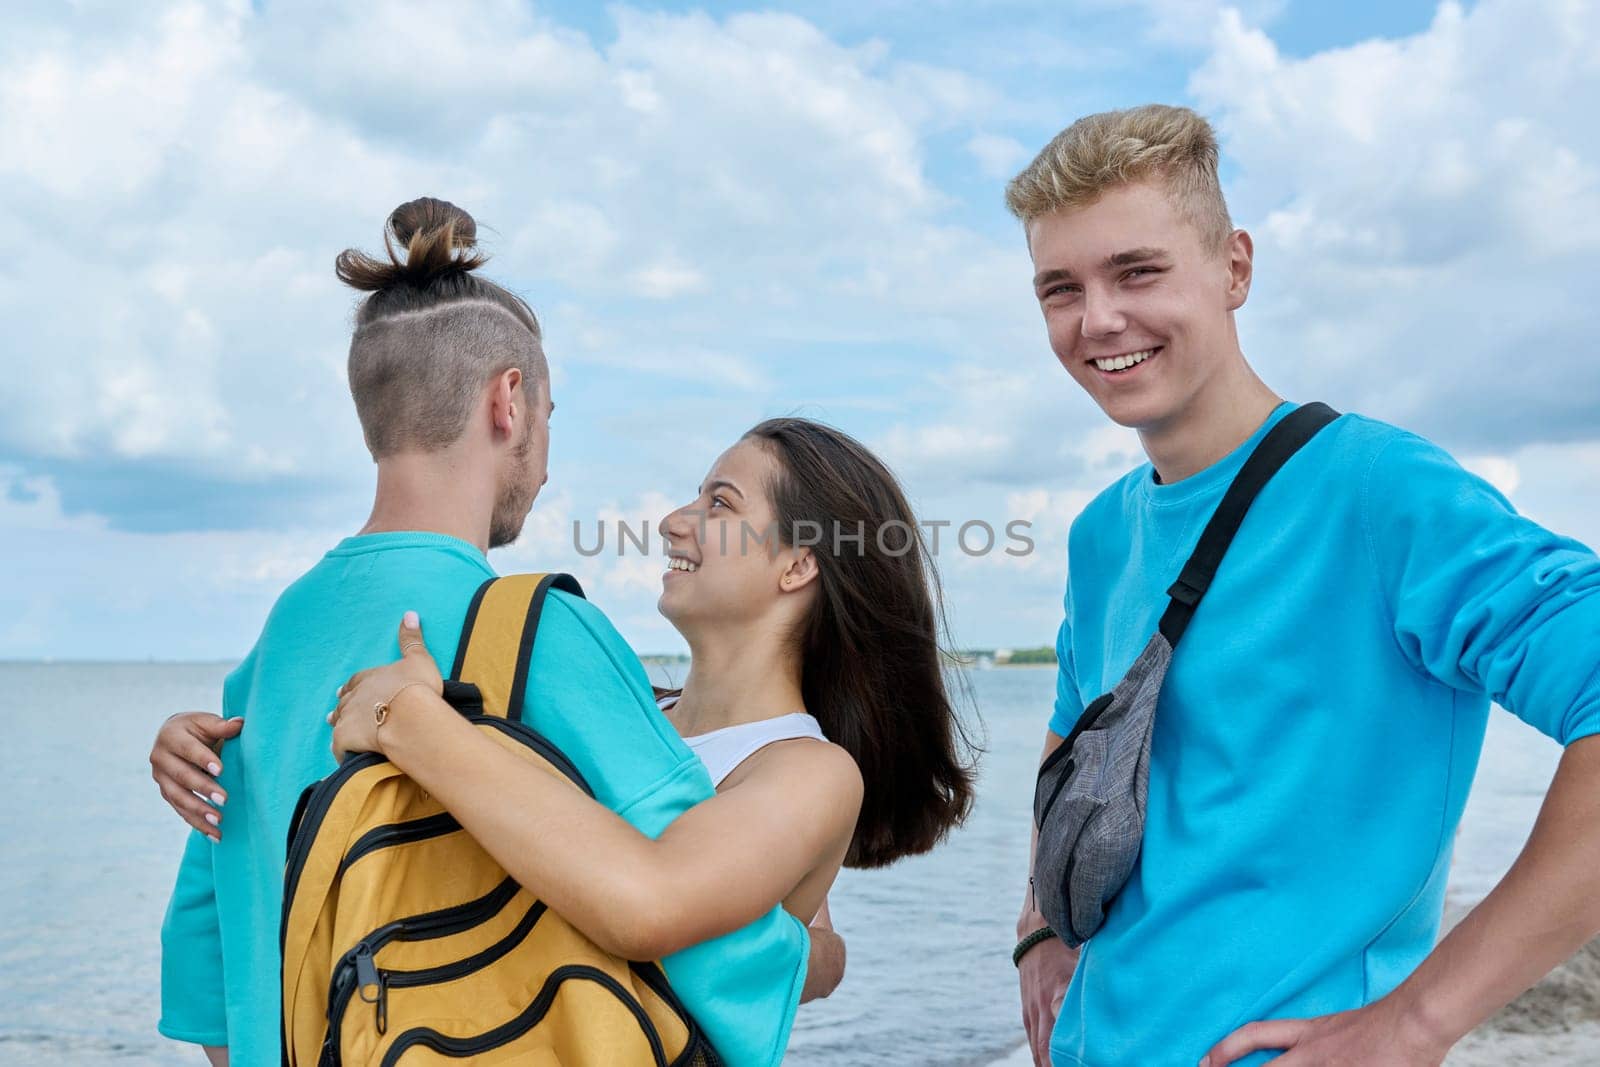 Outdoor teenage friends meeting, hugging teenagers on the beach. Youth, vacation, leisure, friendship, fun, lifestyle holiday concept